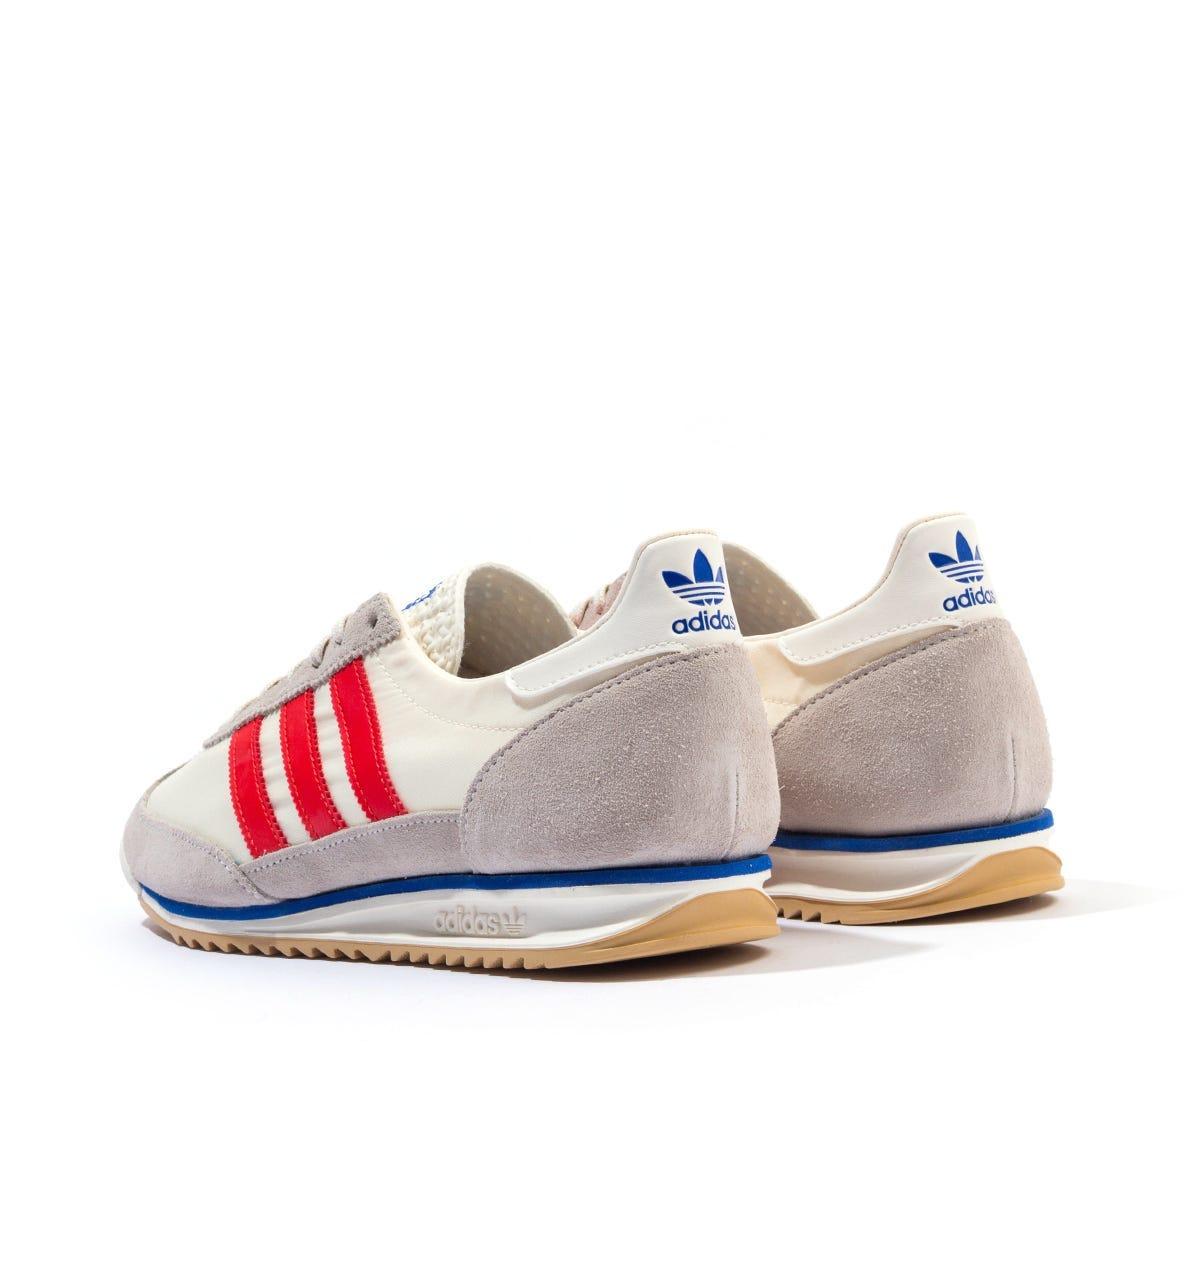 adidas Originals Synthetic Sl 72 Trainers in White for Men - Lyst